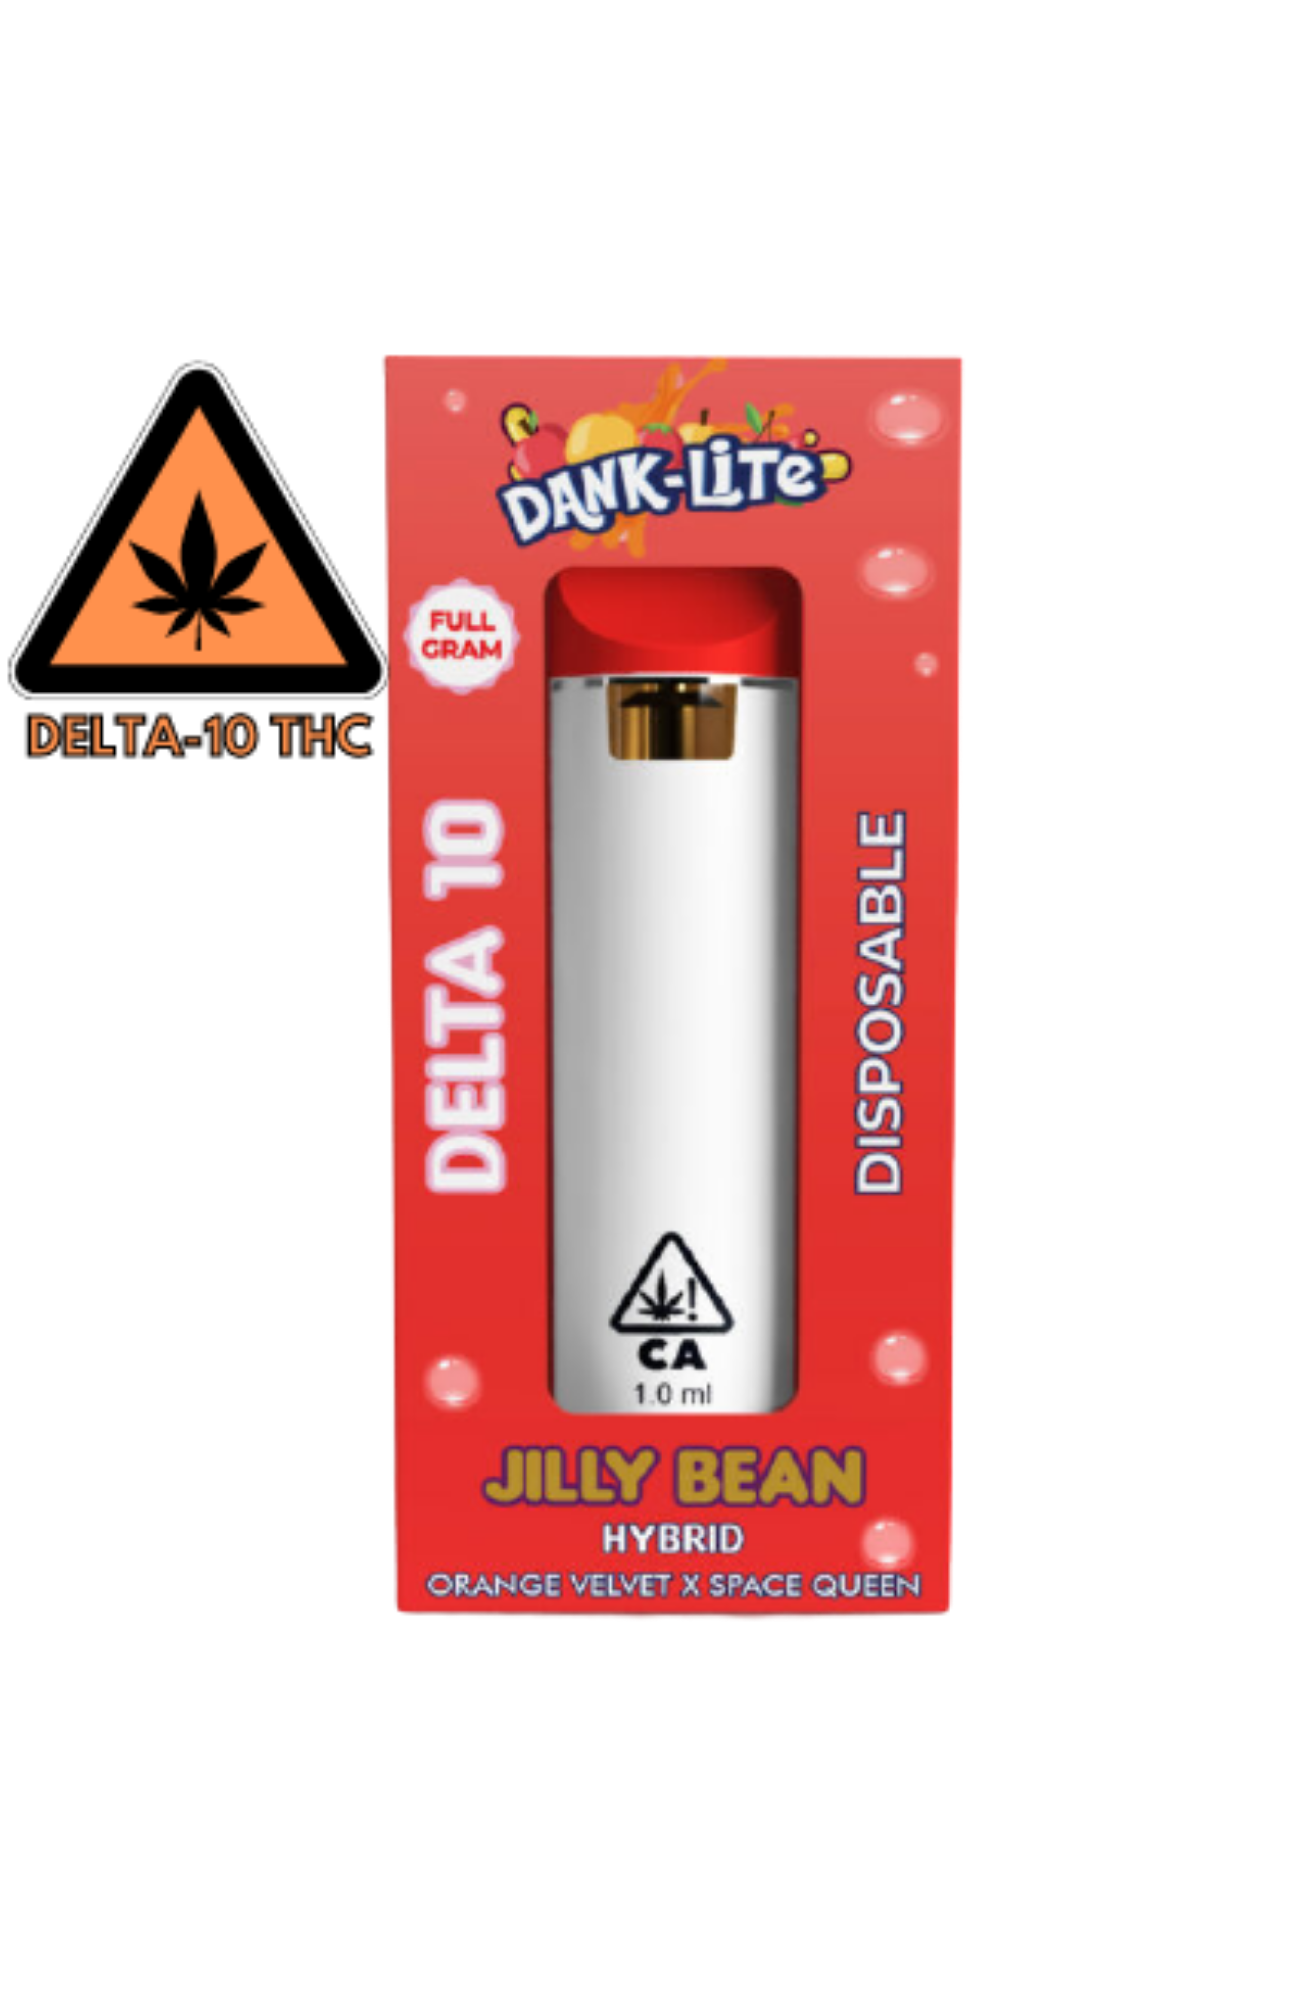 When Did Delta Start Making A Mark 10 C Cdi Ignition - Thc|Delta|Products|Delta-10|Effects|Cbd|Cannabis|Cannabinoids|Cannabinoid|Hemp|Oil|Body|Benefits|Pain|Drug|Inflammation|People|Receptors|Gummies|Arthritis|Market|Product|Marijuana|Delta-8|Research|States|Cb1|Test|Strains|Effect|Vape|Experience|Users|Time|Compound|System|Way|Anxiety|Plants|Chemical|Delta-10 Thc|Delta-9 Thc|Cbd Oil|Drug Test|Delta-10 Products|Side Effects|Delta-8 Thc|Cb1 Receptors|Cb2 Receptors|Cannabis Plants|Endocannabinoid System|Minor Discomfort|Medical Marijuana|Thc Products|Psychoactive Effects|Arthritic Symptoms|New Cannabinoid|Fusion Farms|Arthritic Patients|Conclusion Delta|Medical Cannabis Oil|Arthritis Pain|Good Fit|Double Bond|Anticonvulsant Actions|Medical Benefit|Anticonvulsant Properties|Epileptic Children|User Guide|Farm Bill